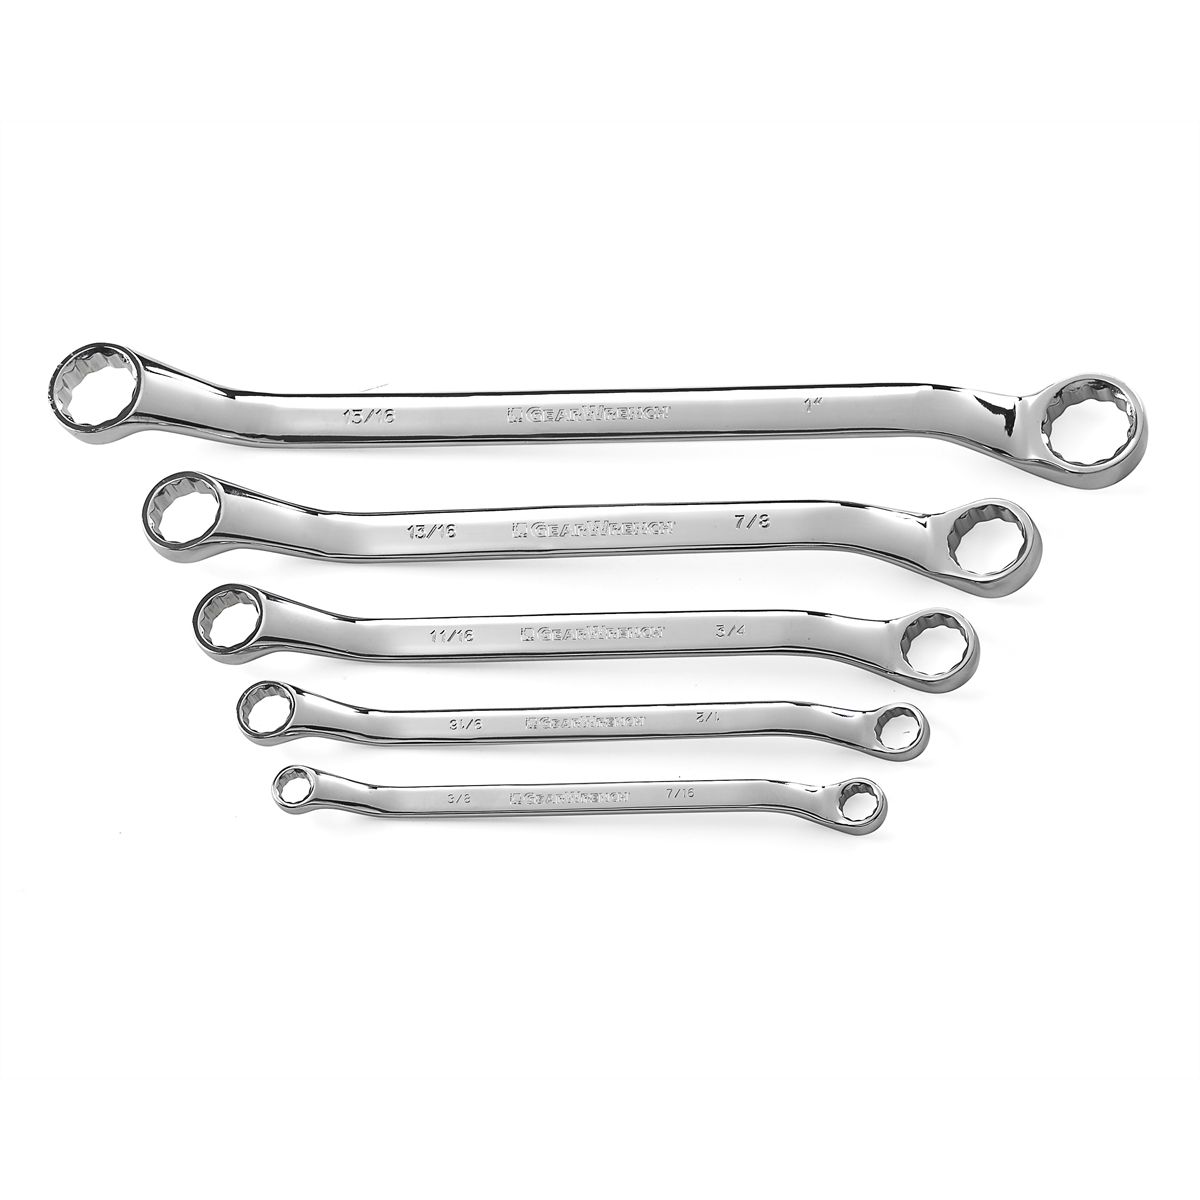 10 SIZES METRIC 5pc DOUBLE ENDED 25 DEGREE OFFSET BOX STYLE RATCHET WRENCH SET